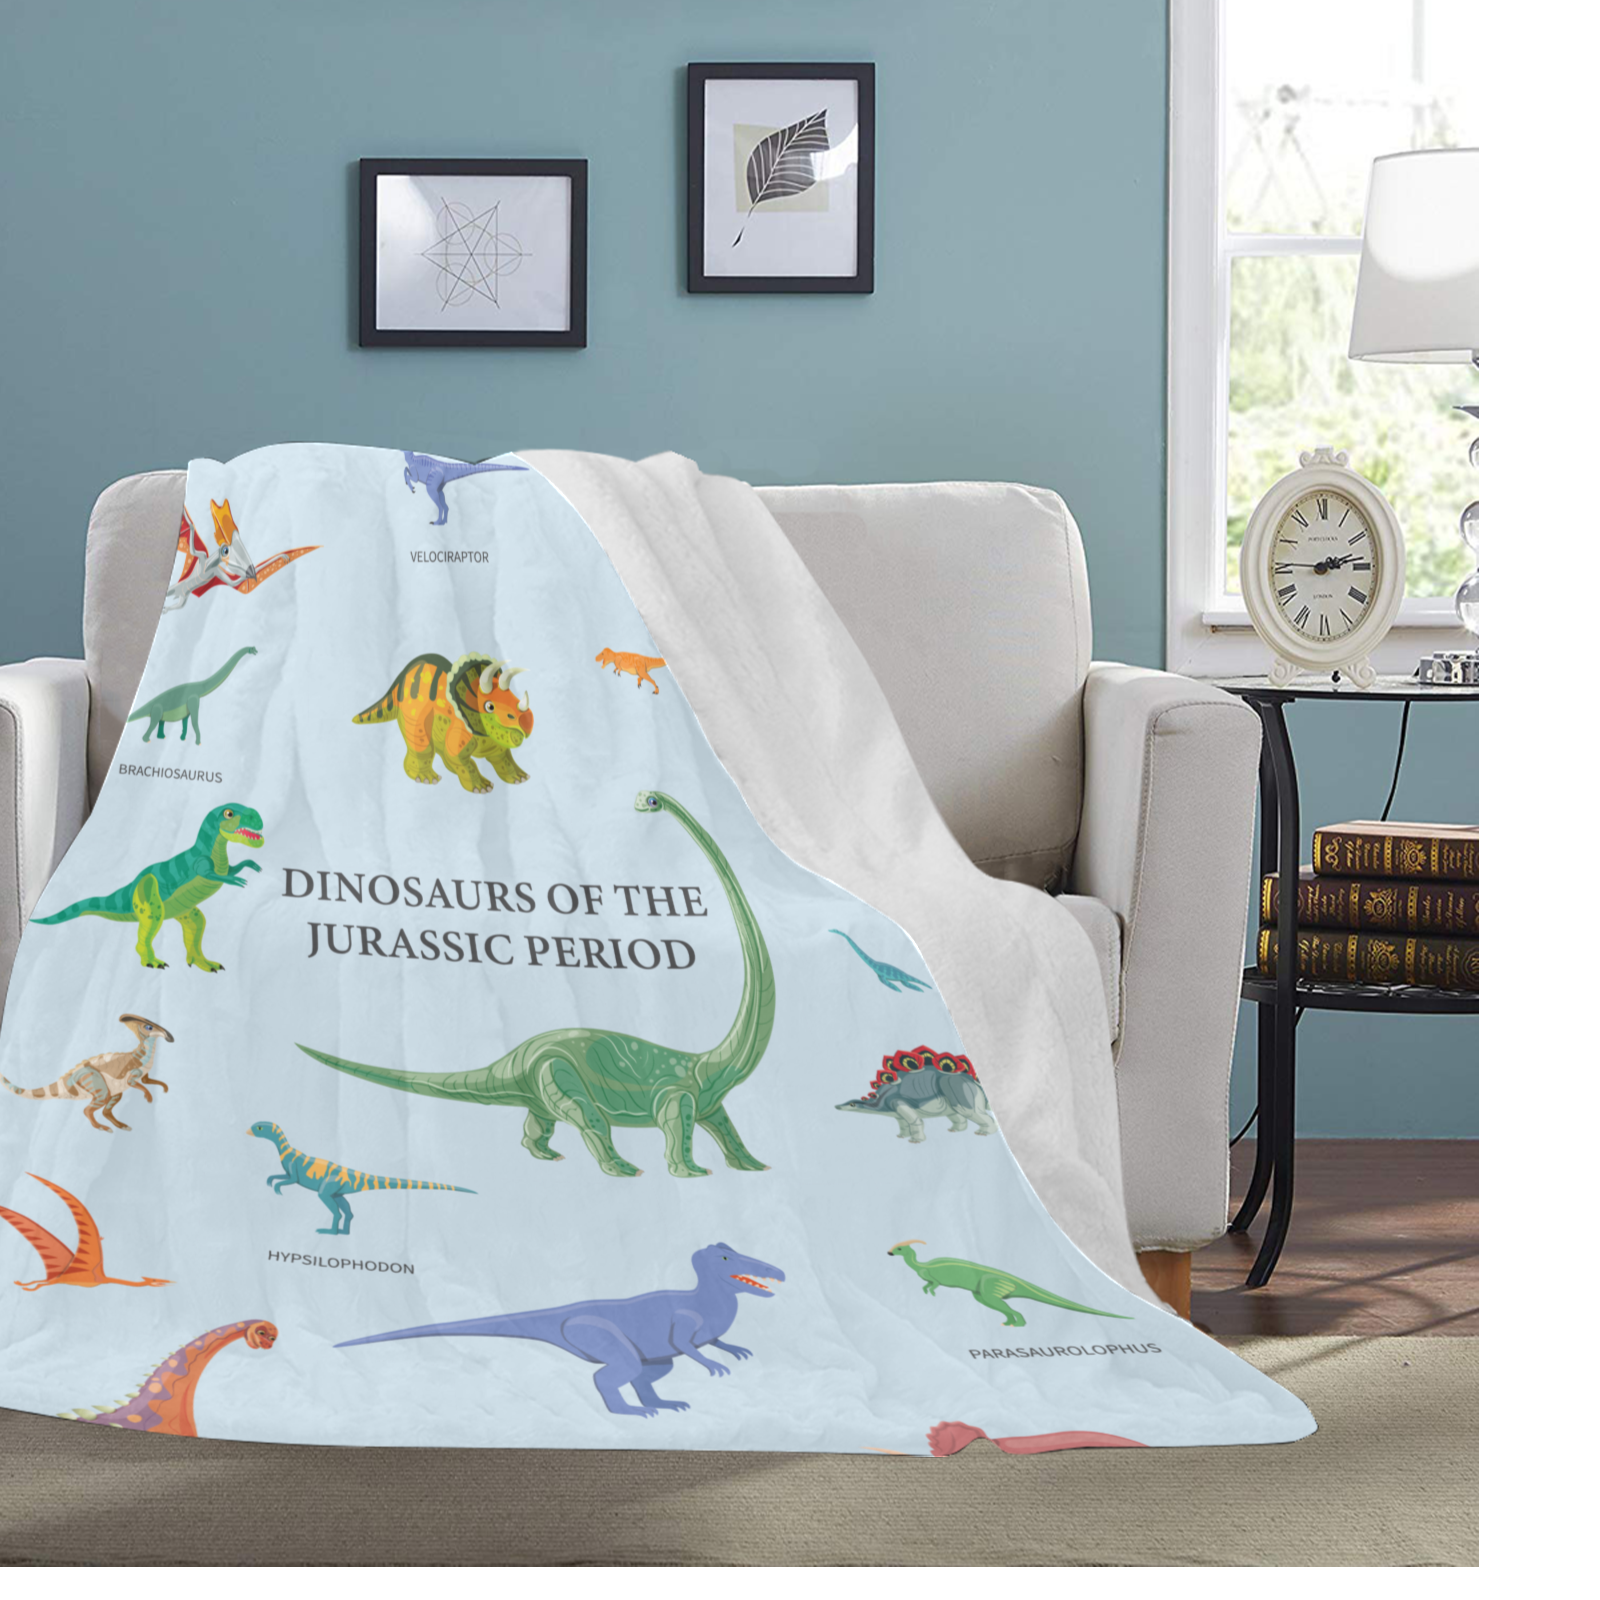 Awesome "Dinosaurs of the Jurassic Period" Blanket - USTAD HOME